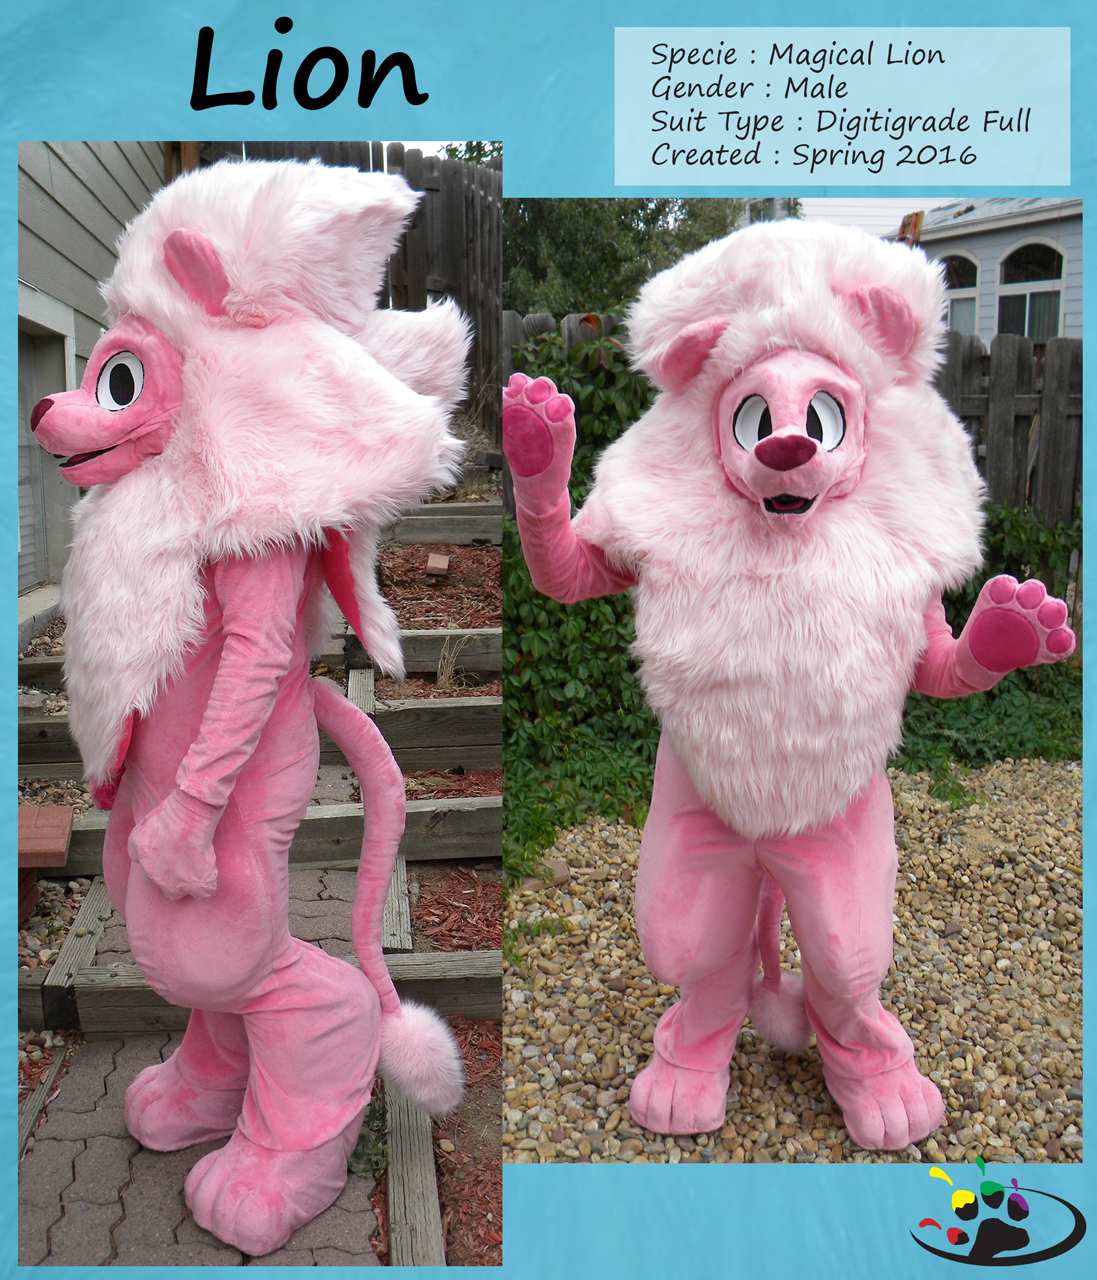 A pink fluffy lion cosplay